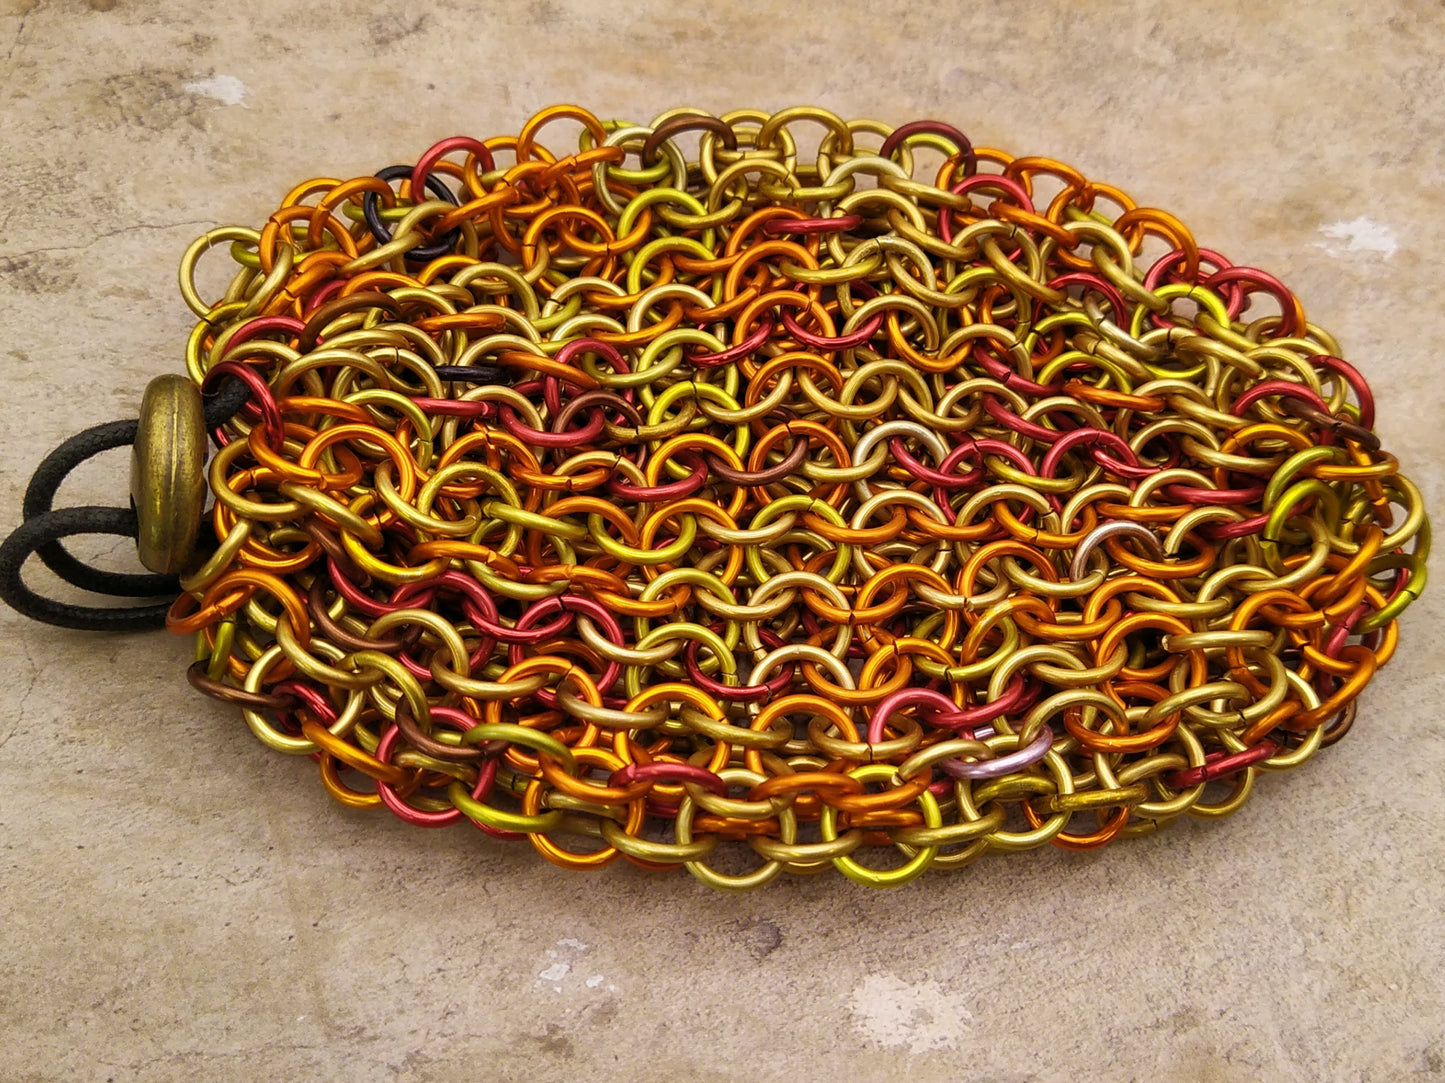 Chainmaille pouches